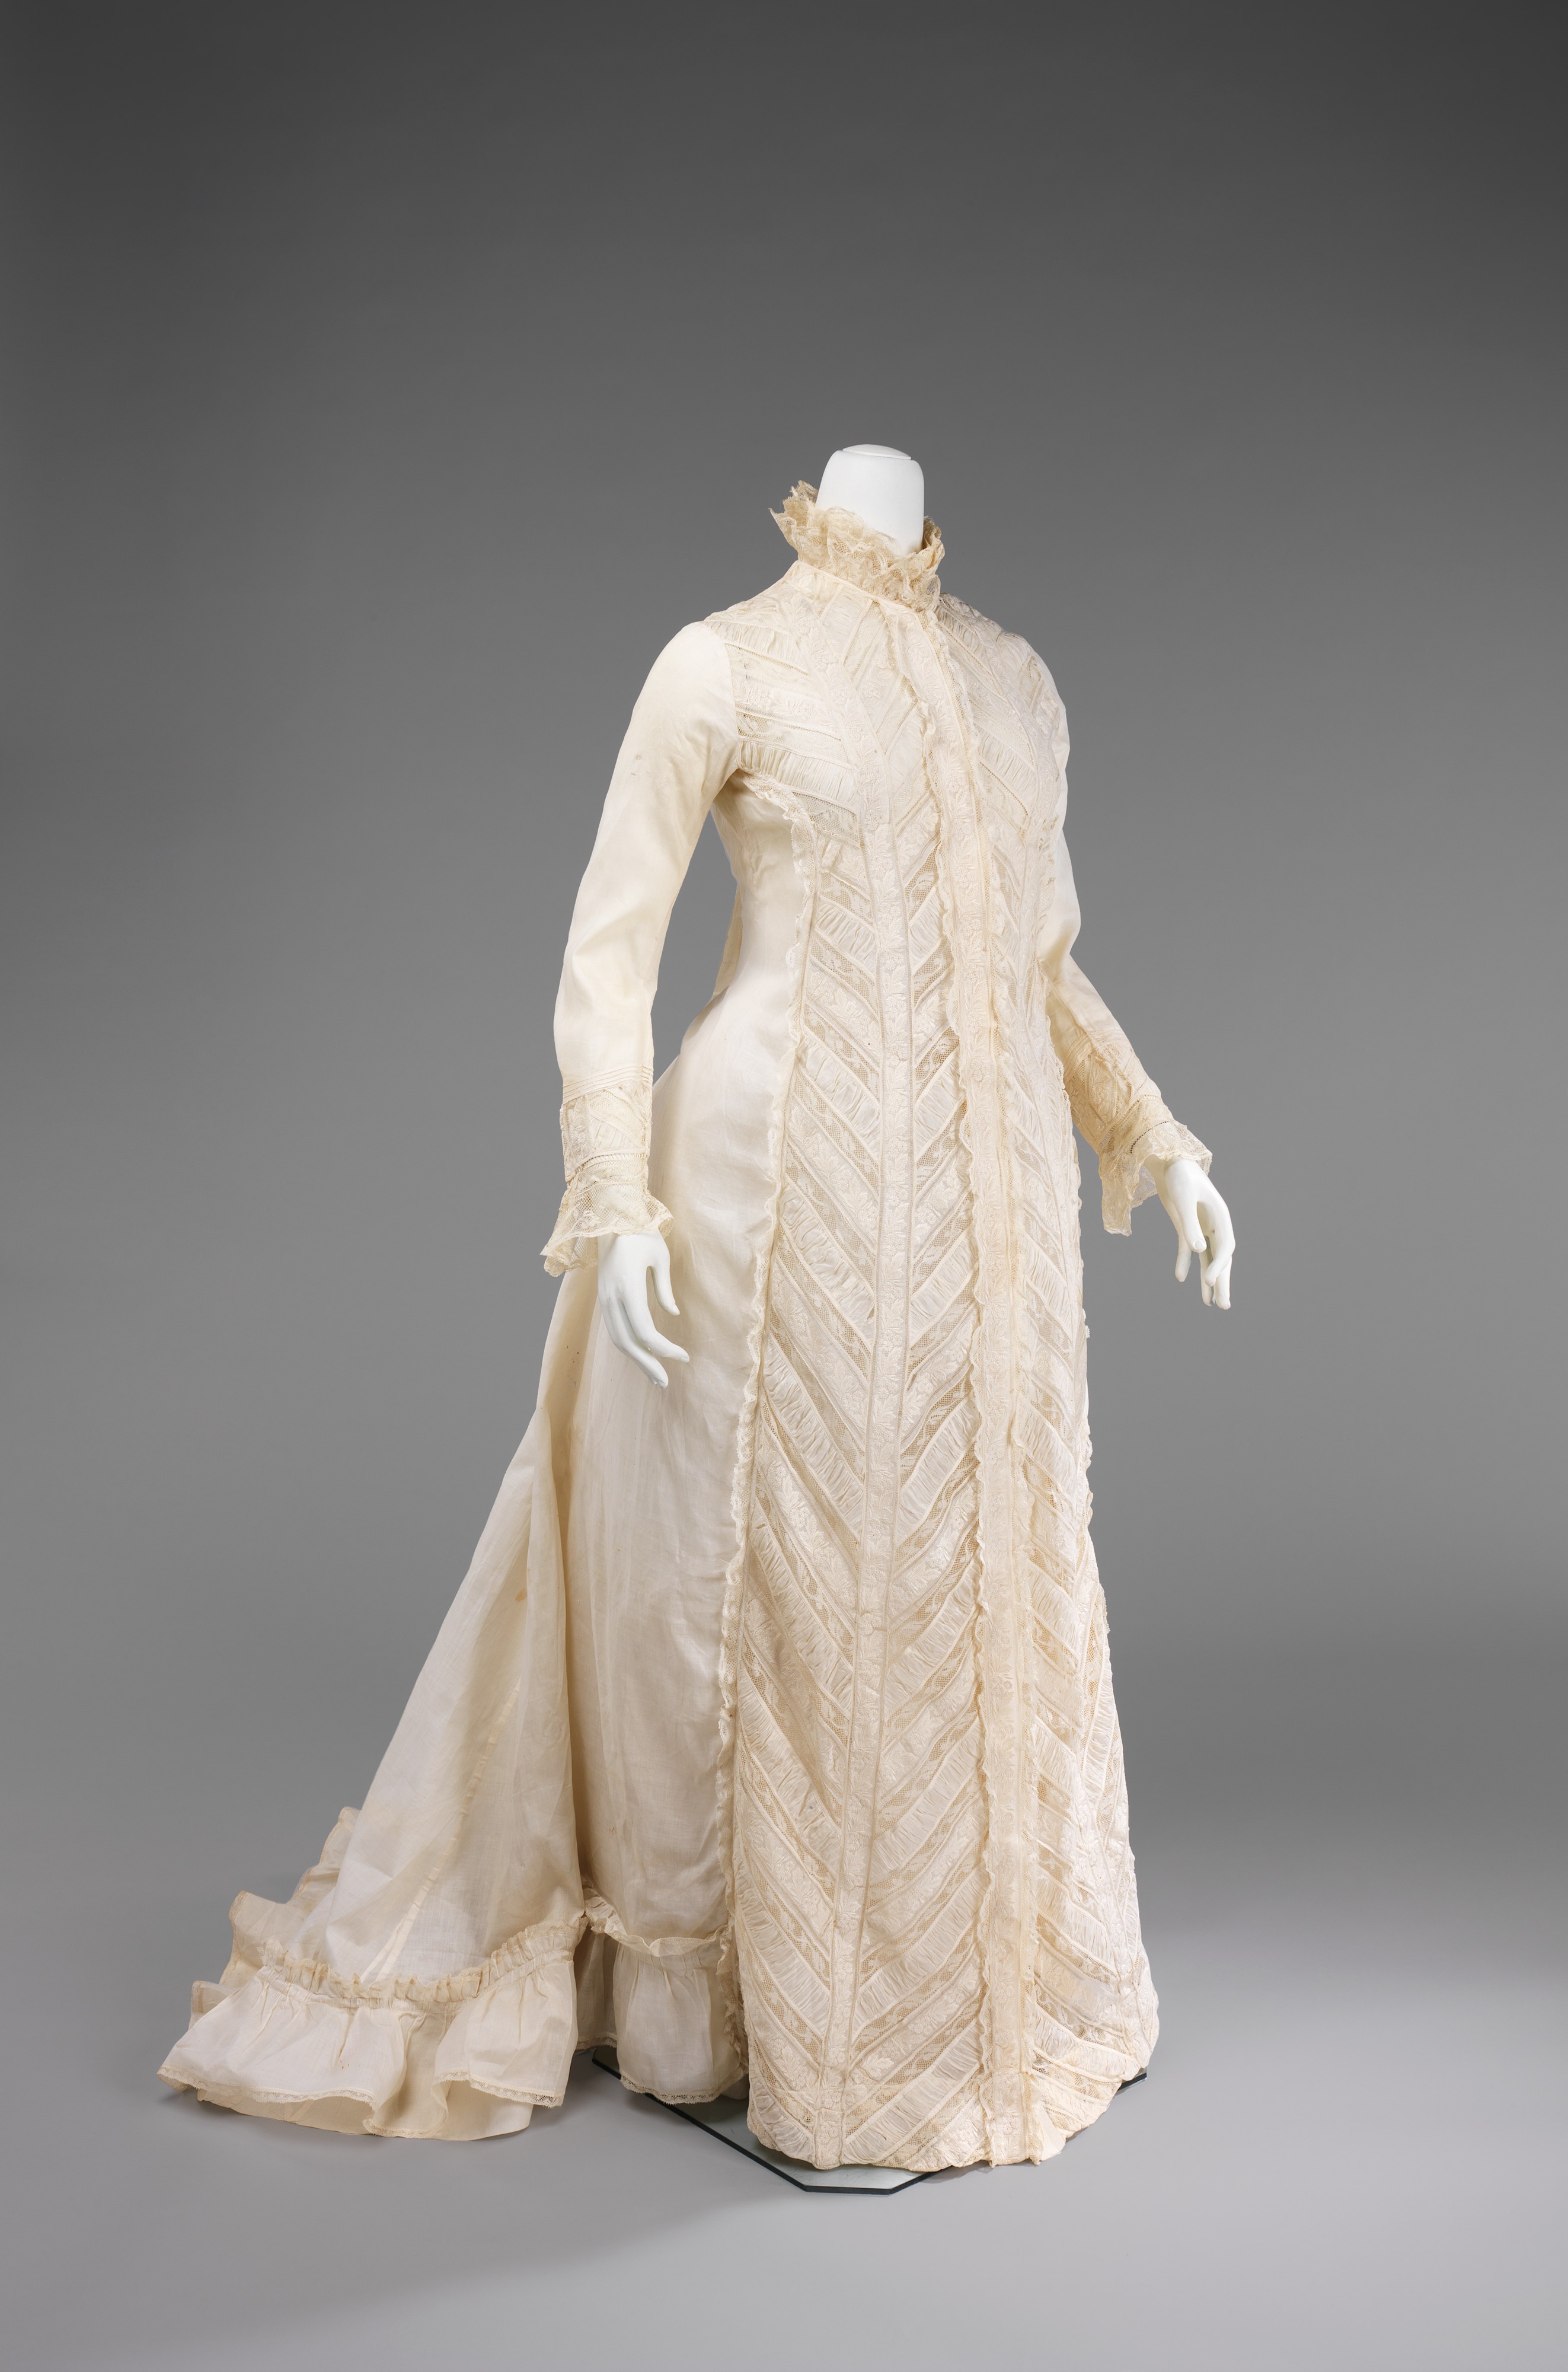 Dressing gown, American